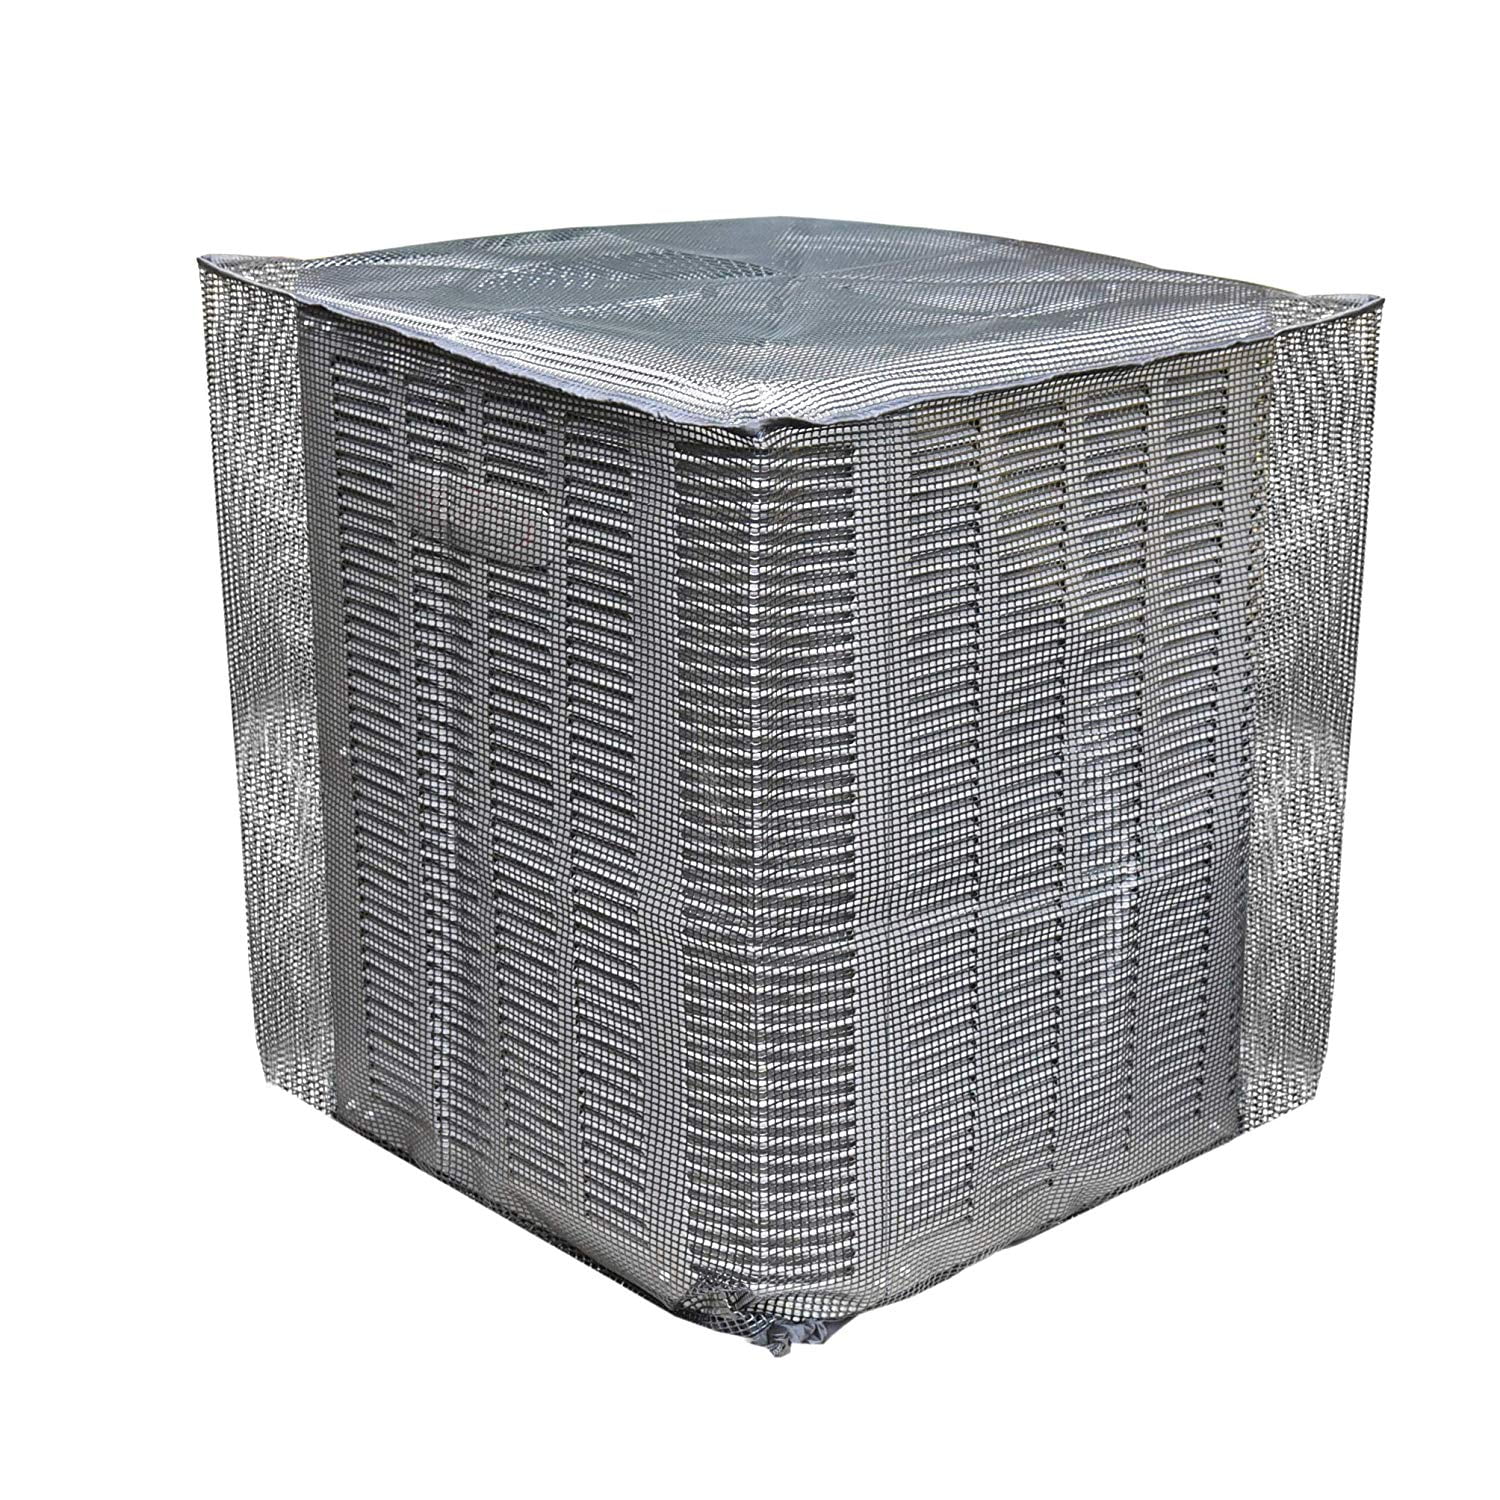 TRELC Air Conditioner Cover Adjustable AC Unit Defender Cover Protect from Clogging 35.4 x 35.4 x 39.4 All Seasons Mesh Air Conditioner Cover for Outdoor AC Unit Leaves Cotton Wood Twigs 